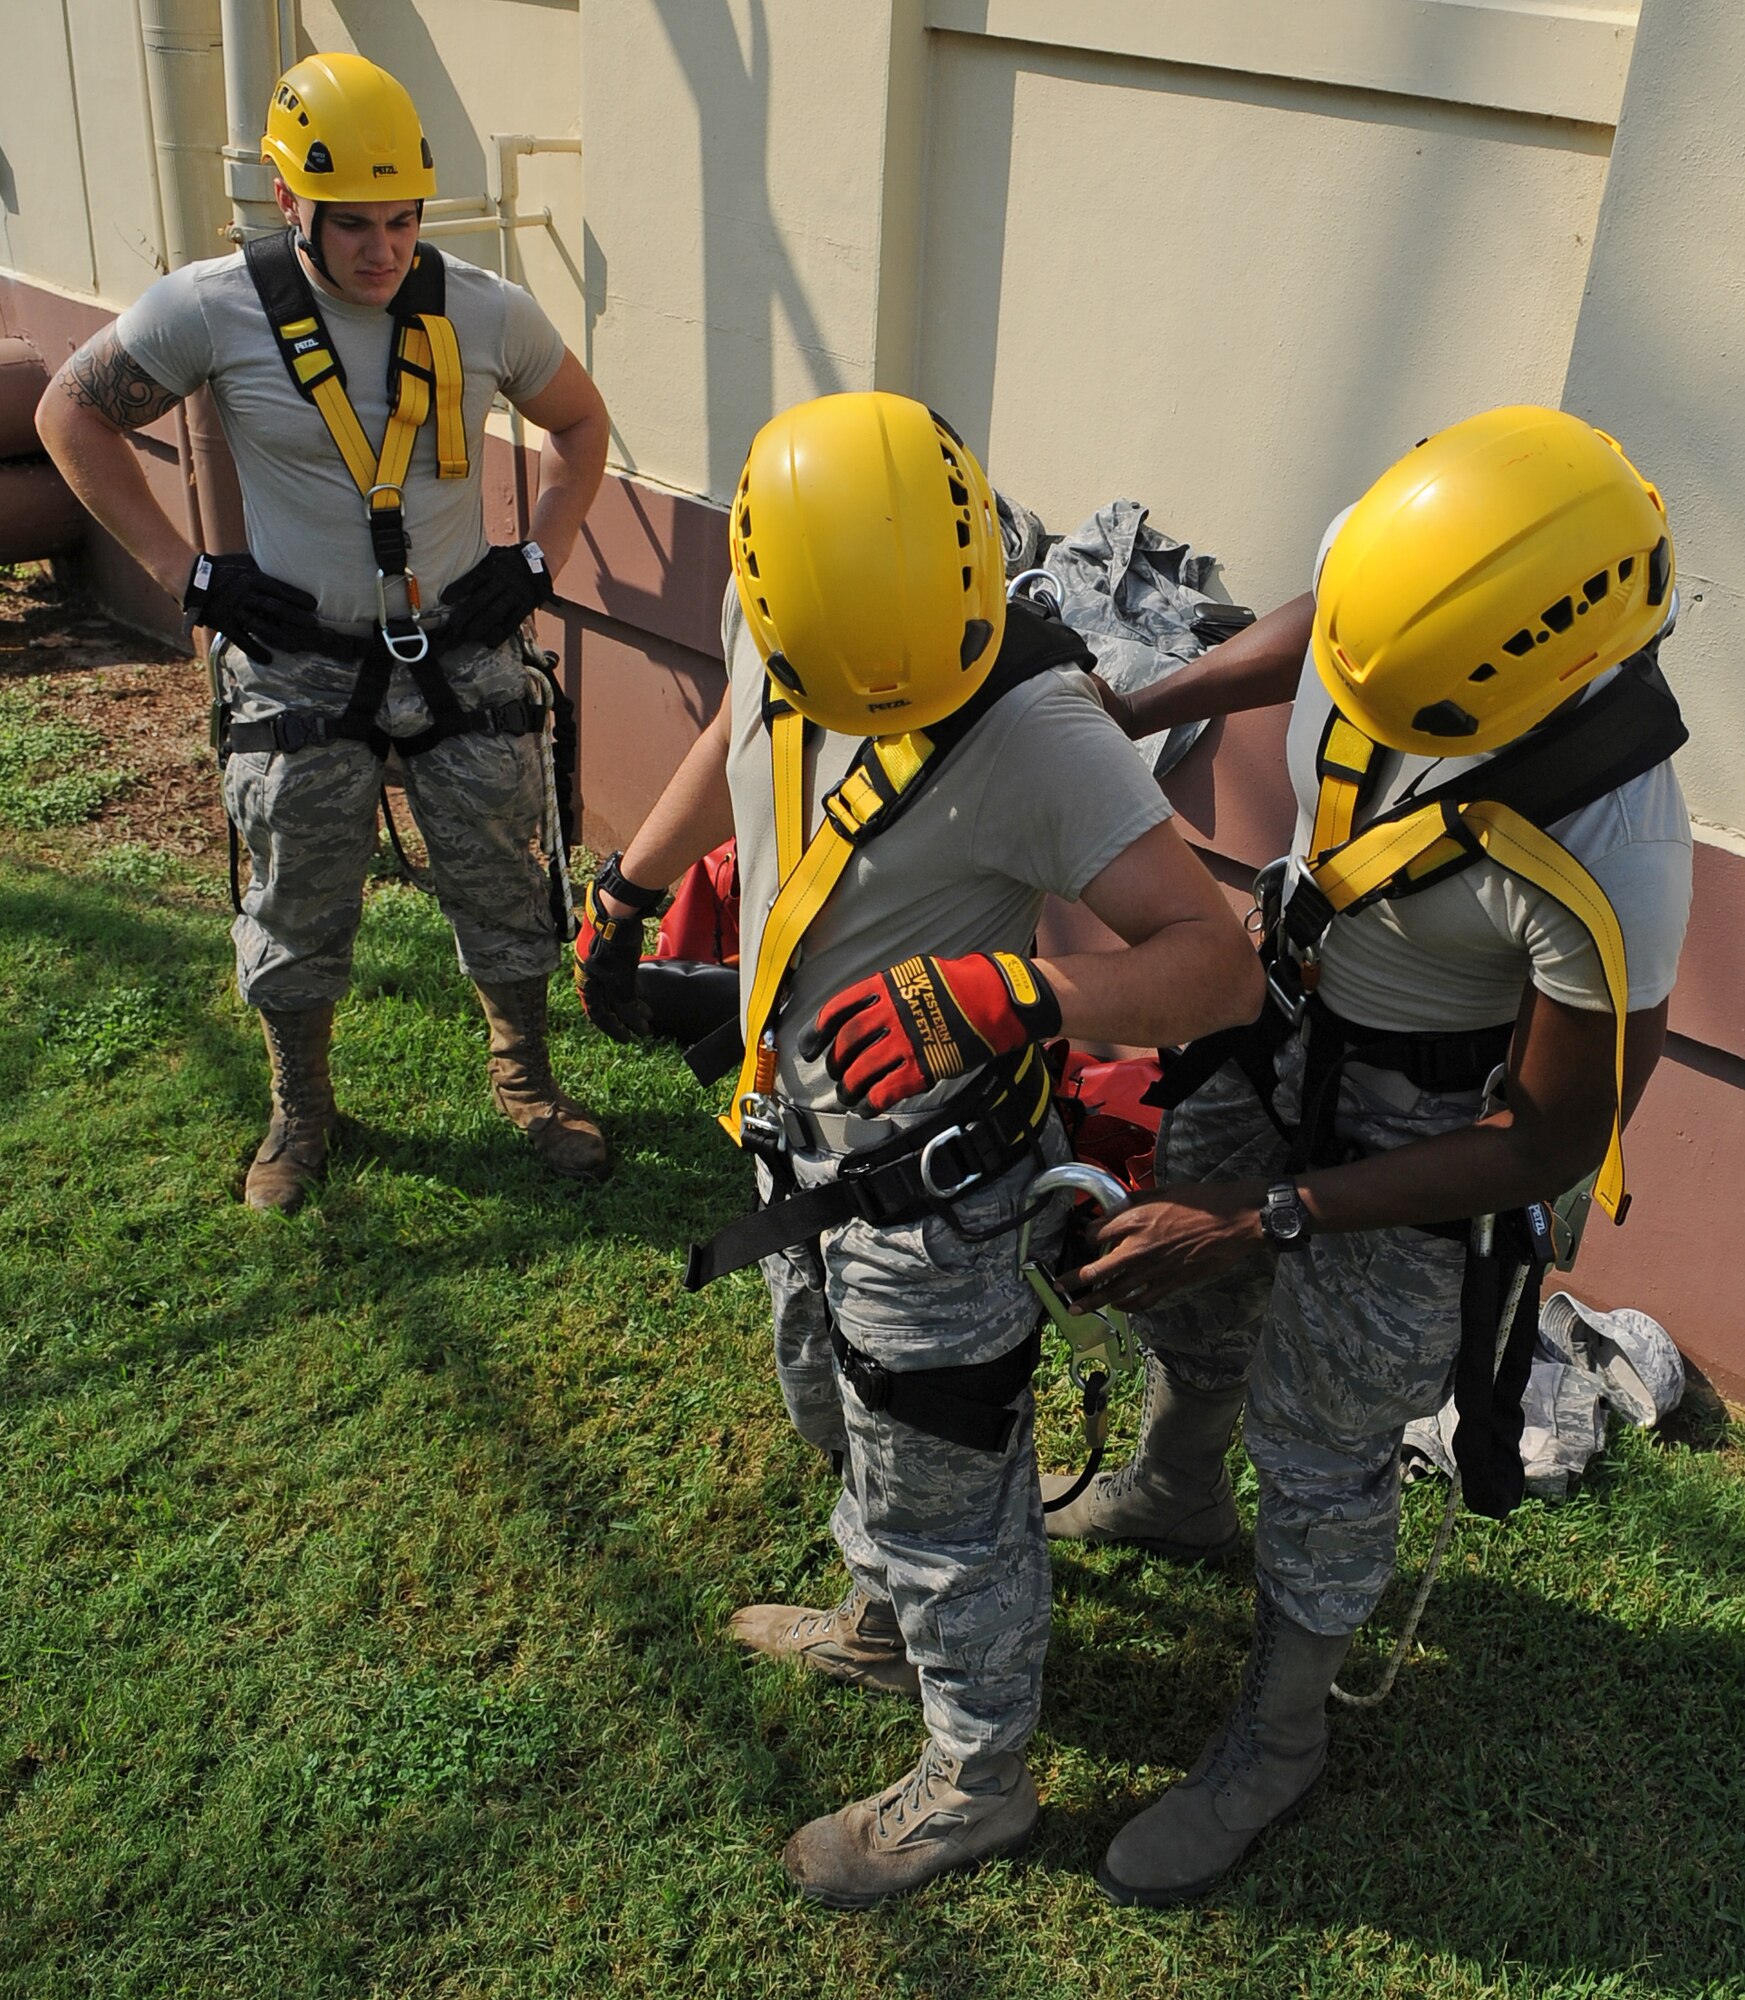 Cable Dawgs from the 2nd Communications Squadron check each other's safety harnesses on Barksdale Air Force Base, La., Sept. 18. The Airmen donned the harnesses so they could climb a tower to inspect antennas. In addition to safety harnesses, Cable Dawgs wear helmets, gloves and special boots to assist them in climbing. (U.S. Air Force photo/Senior Airman Micaiah Anthony)(RELEASED)